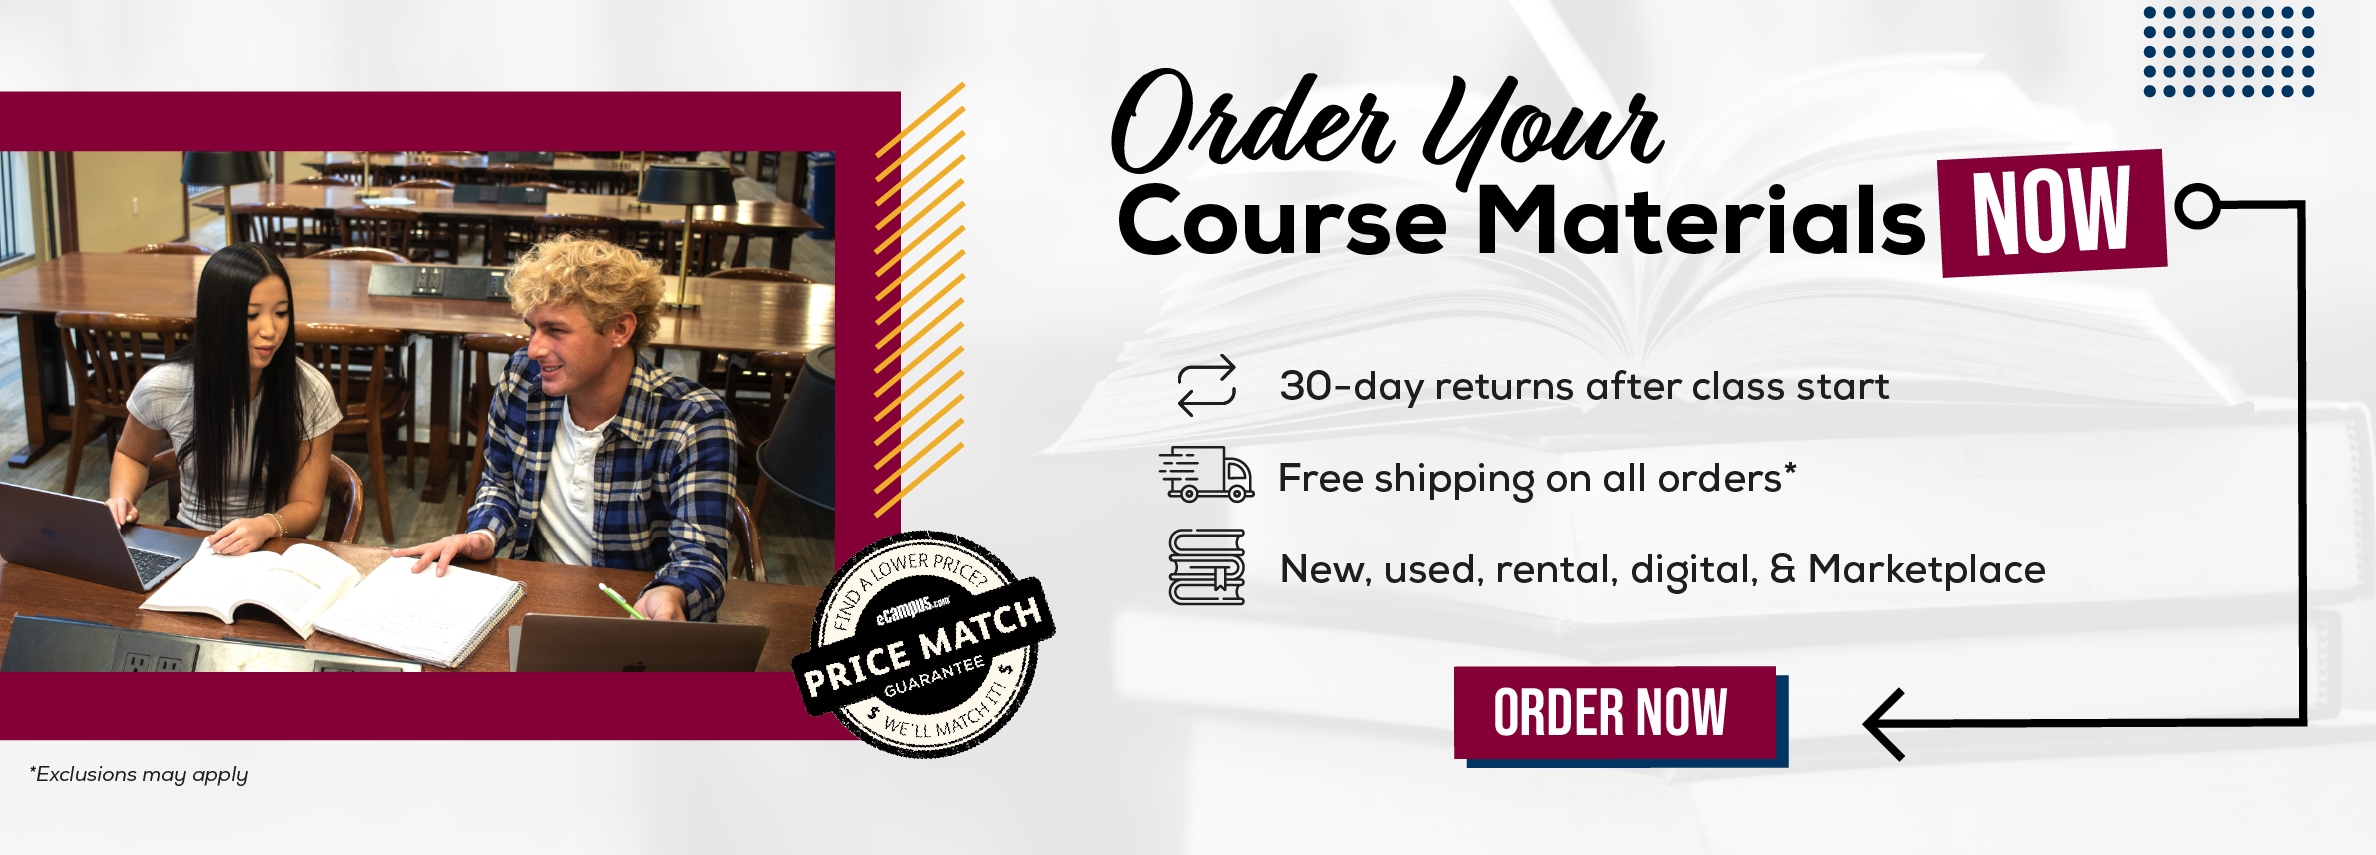 Order Your Course Materials Now. 30-day returns after class start. Free shipping on all orders* New, used, rental, digital, & Marketplace. Order now. *Exclusions may apply.